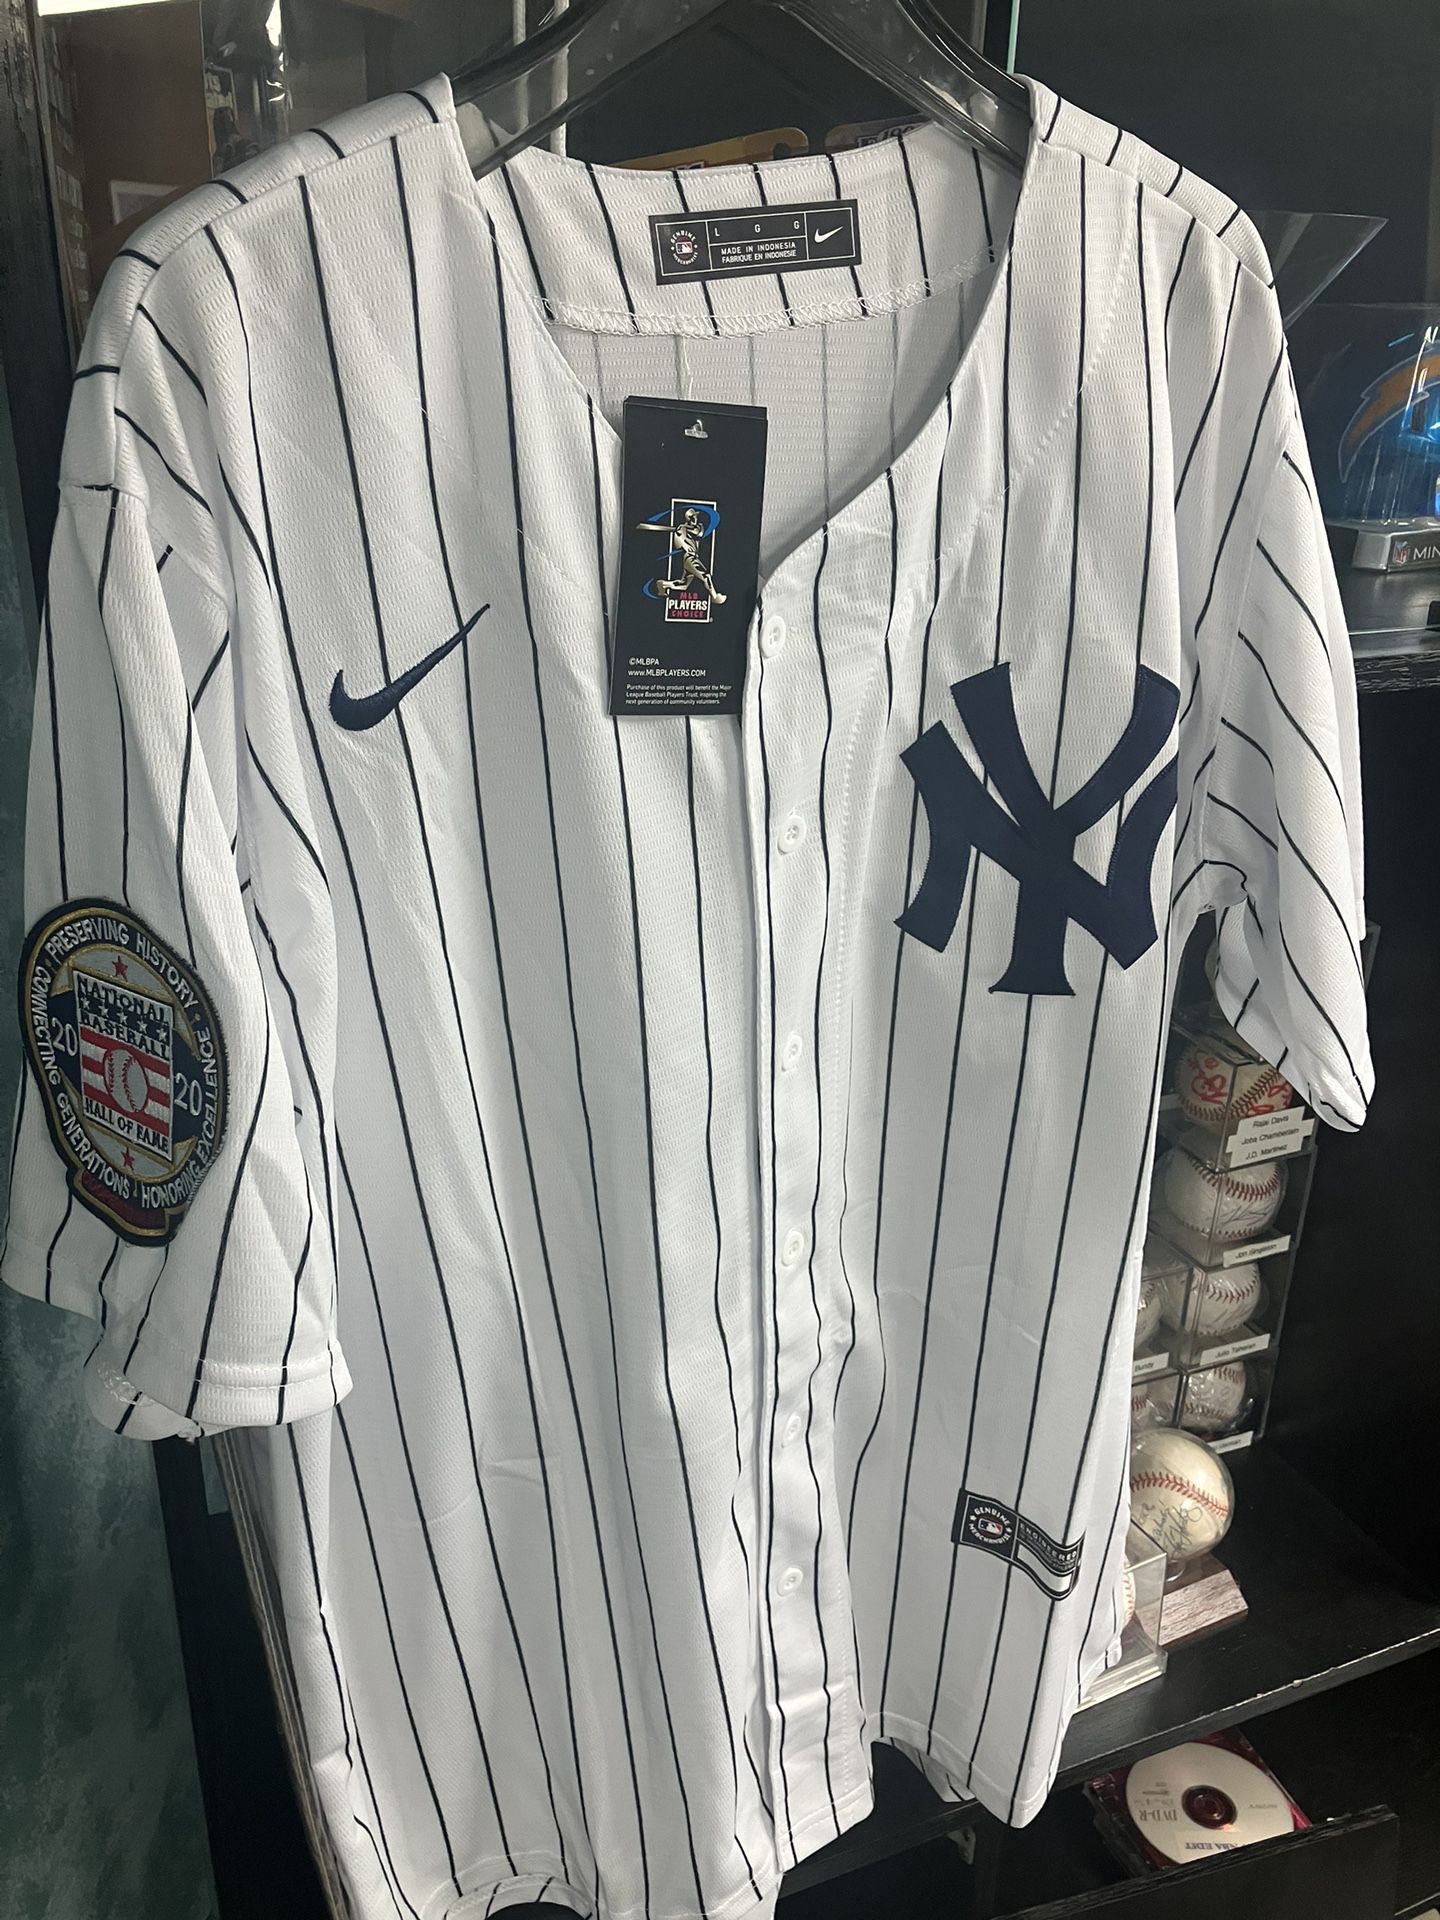 Derek jeter nike hall of fame edition nike jersey yankees mlb pinstriped  large for Sale in Montvale, NJ - OfferUp